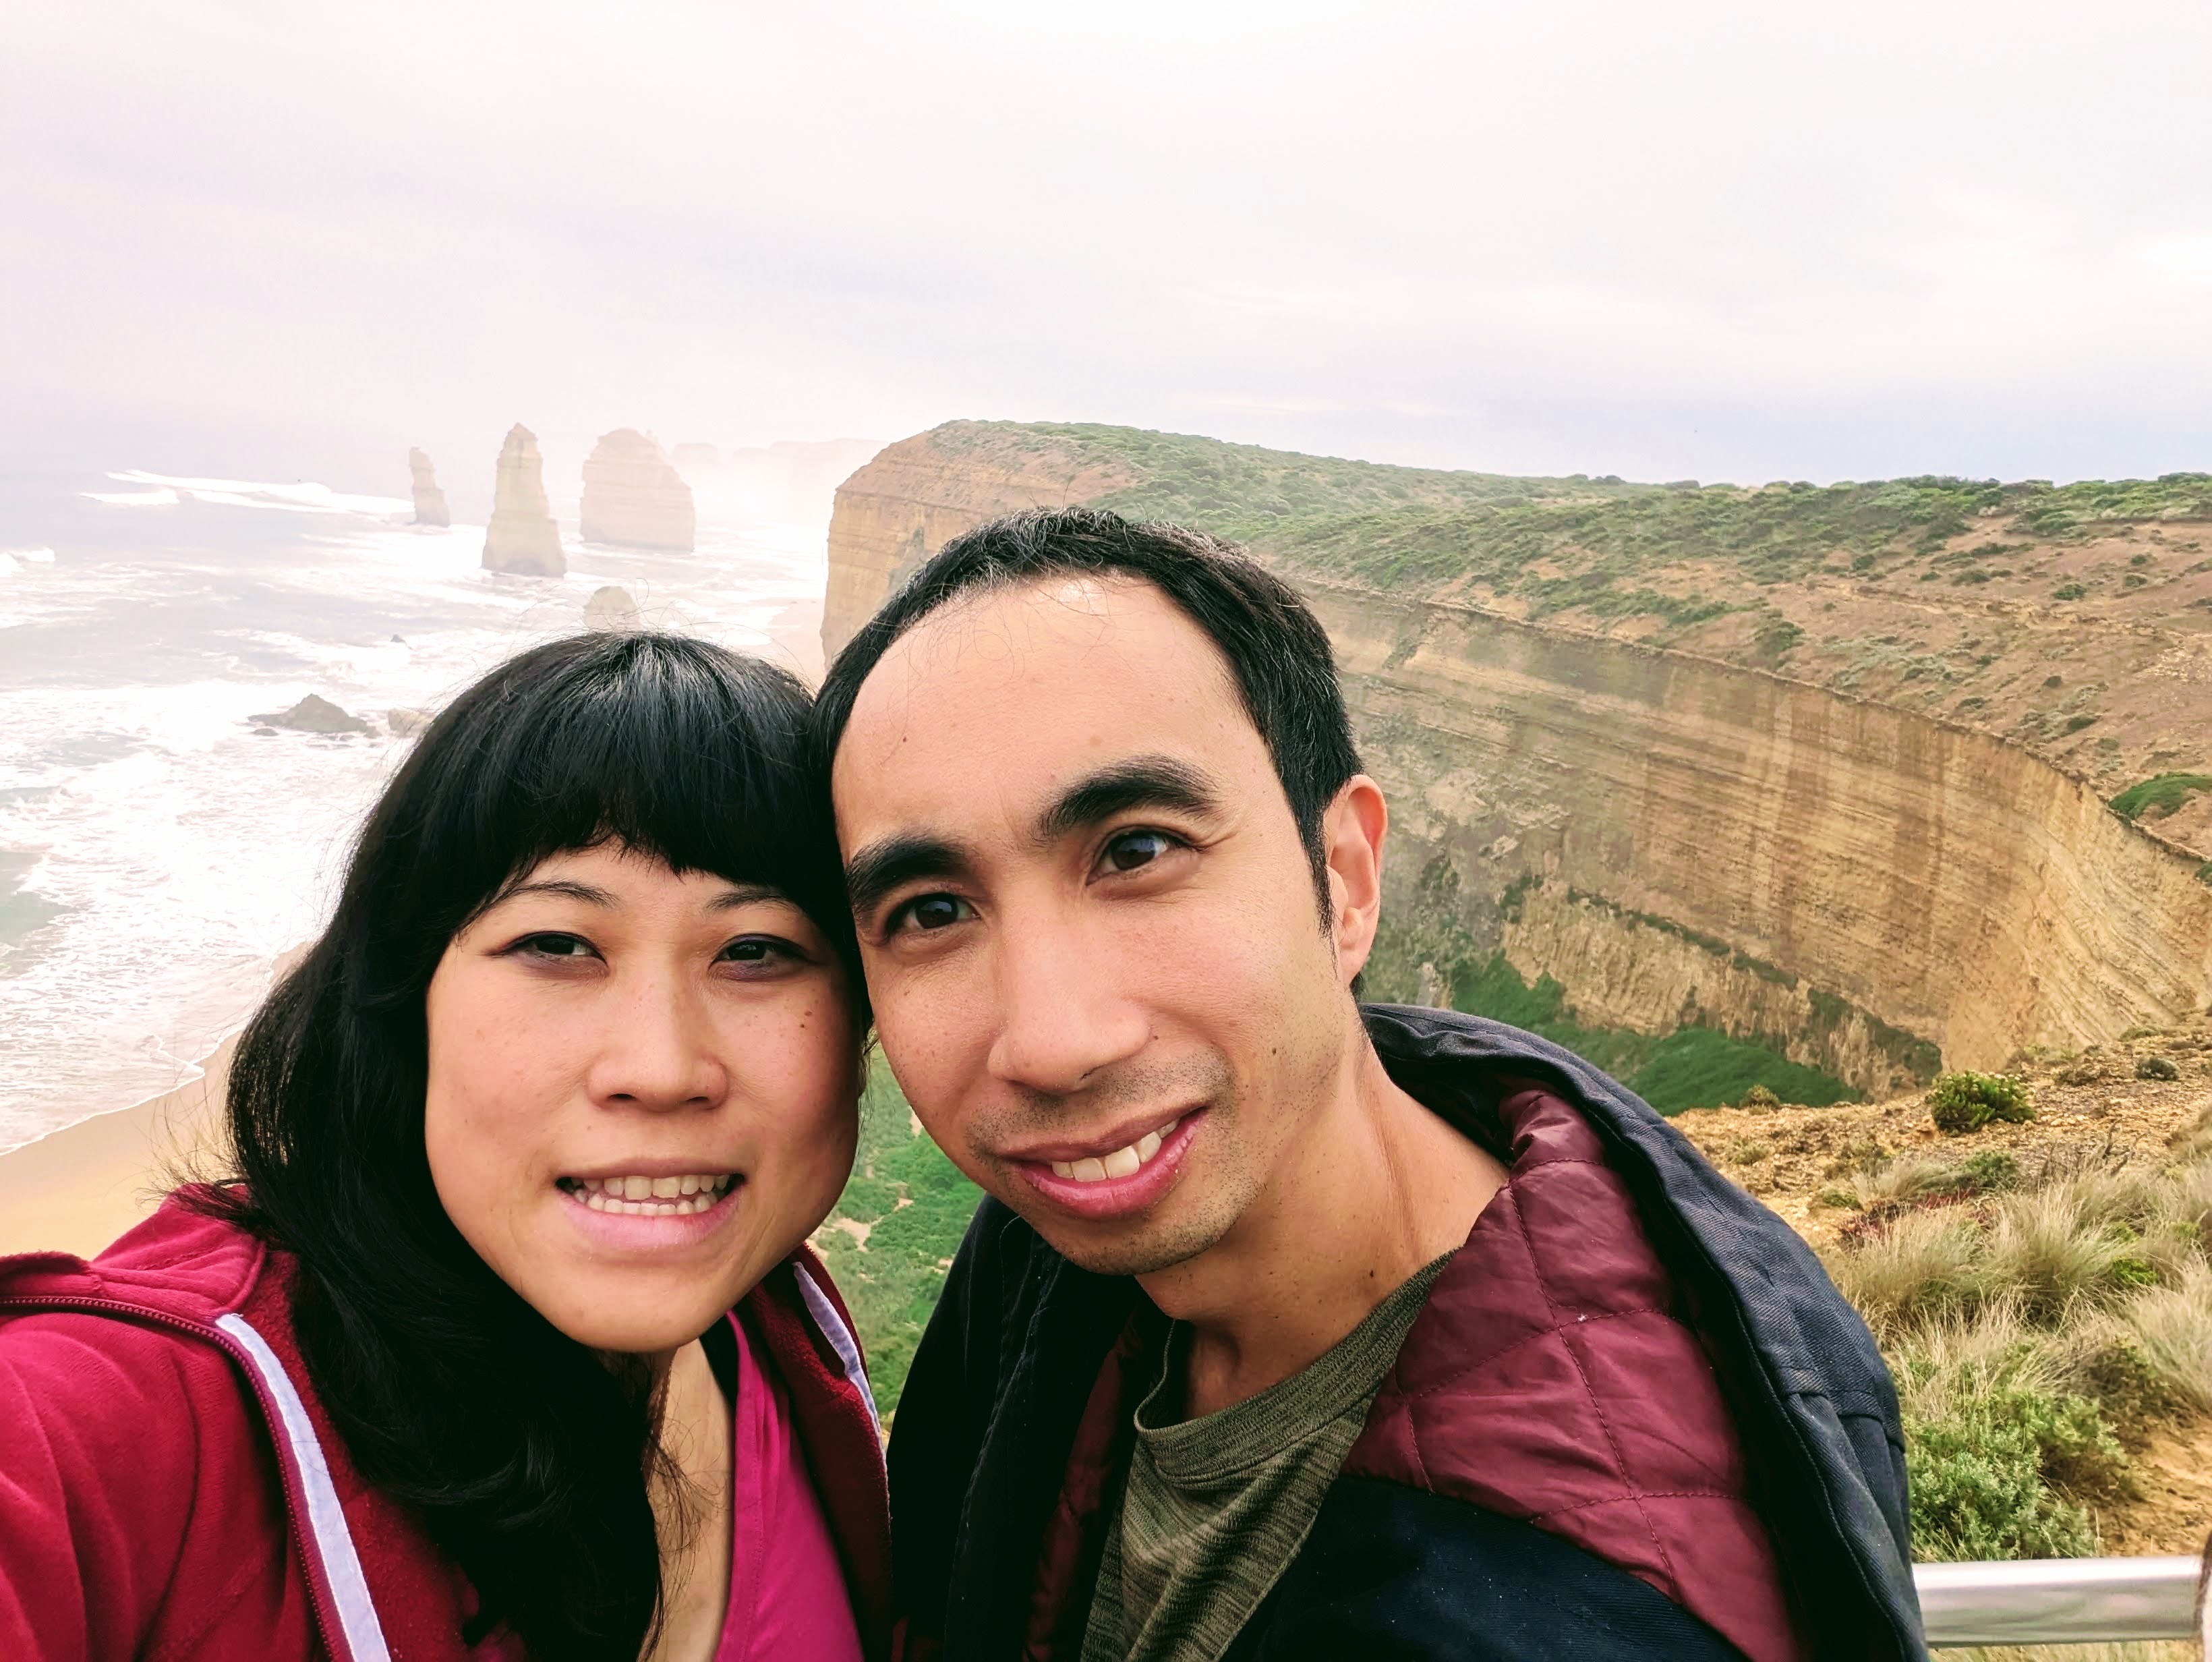 A woman and her husband pose for a photo on cliffs overlooking a misty sea.